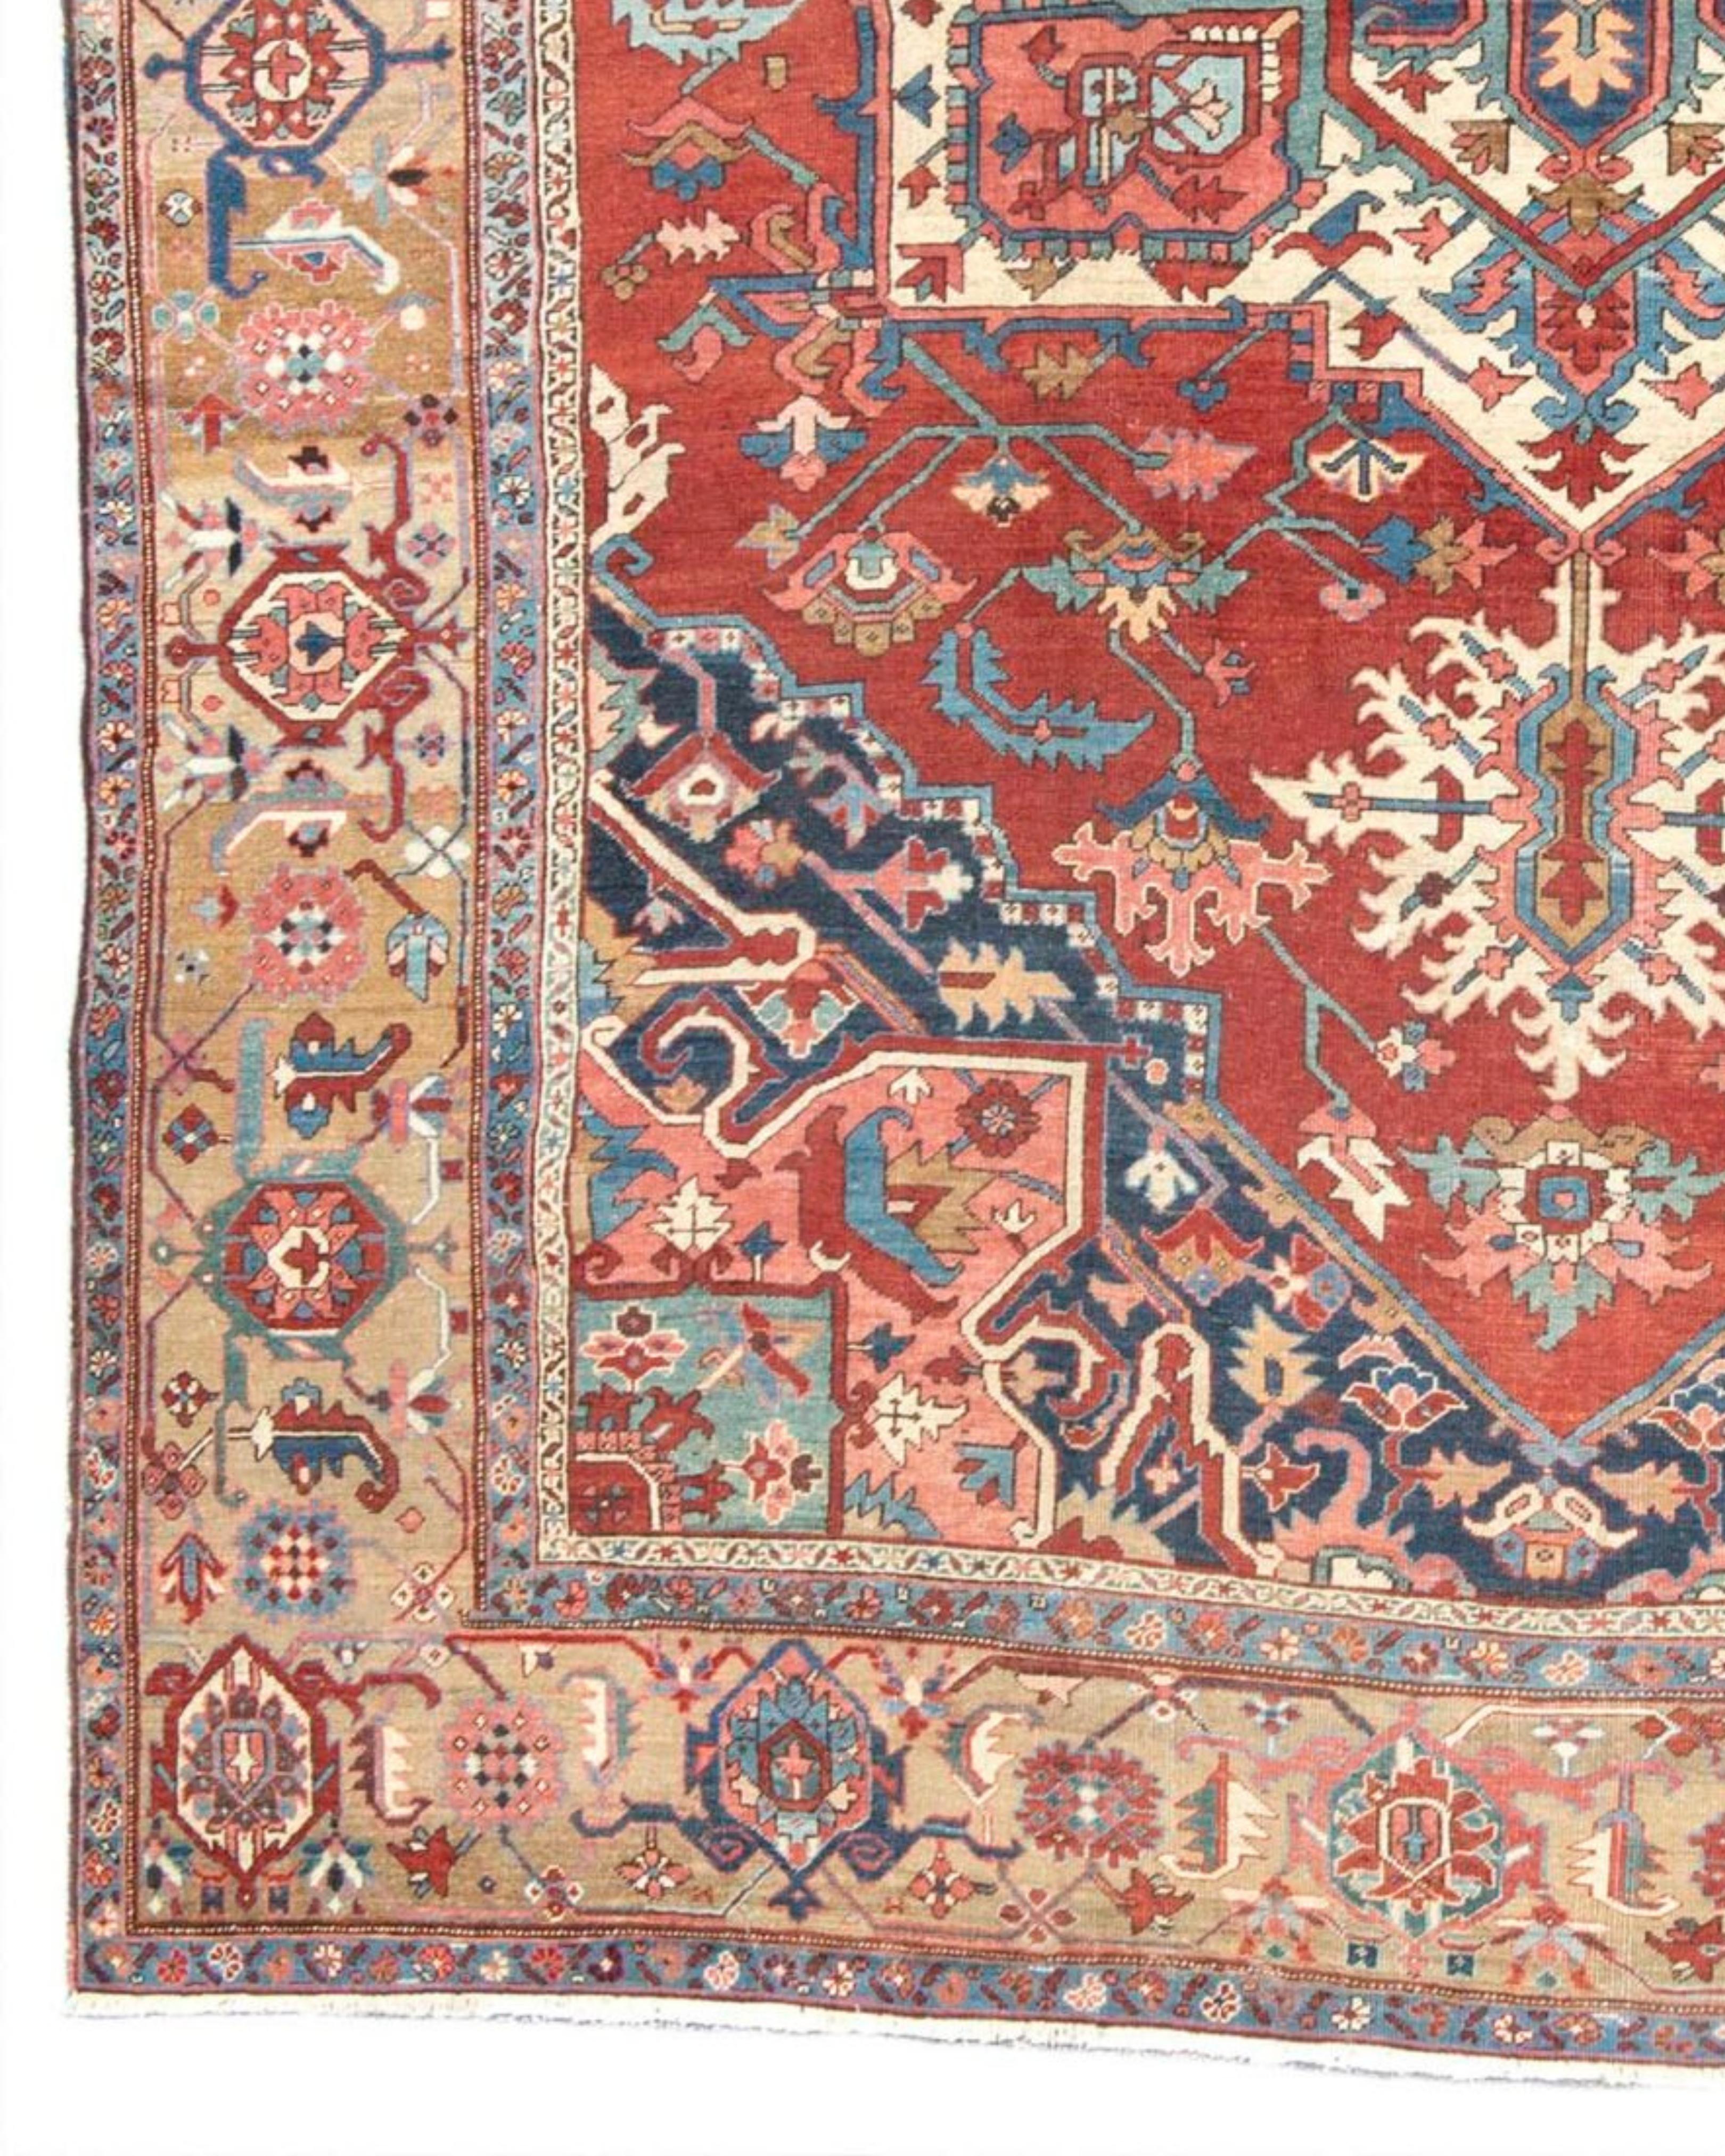 Hand-Knotted Antique Large Persian Serapi Carpet, c. 1900 For Sale